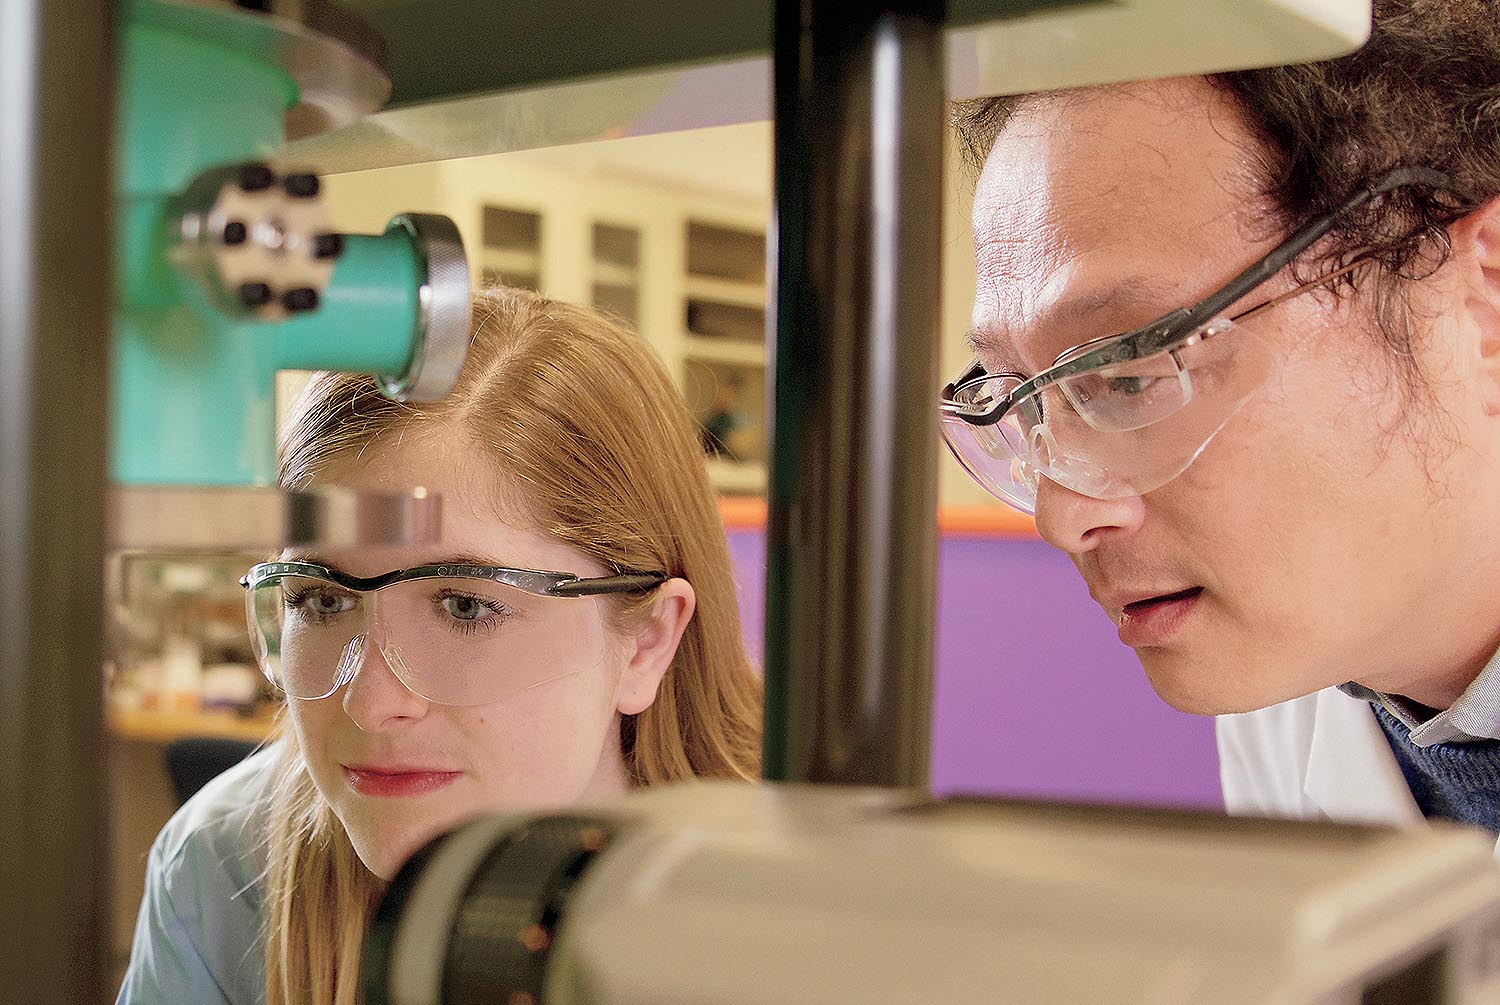 Woman and man in science lab examining equipment.